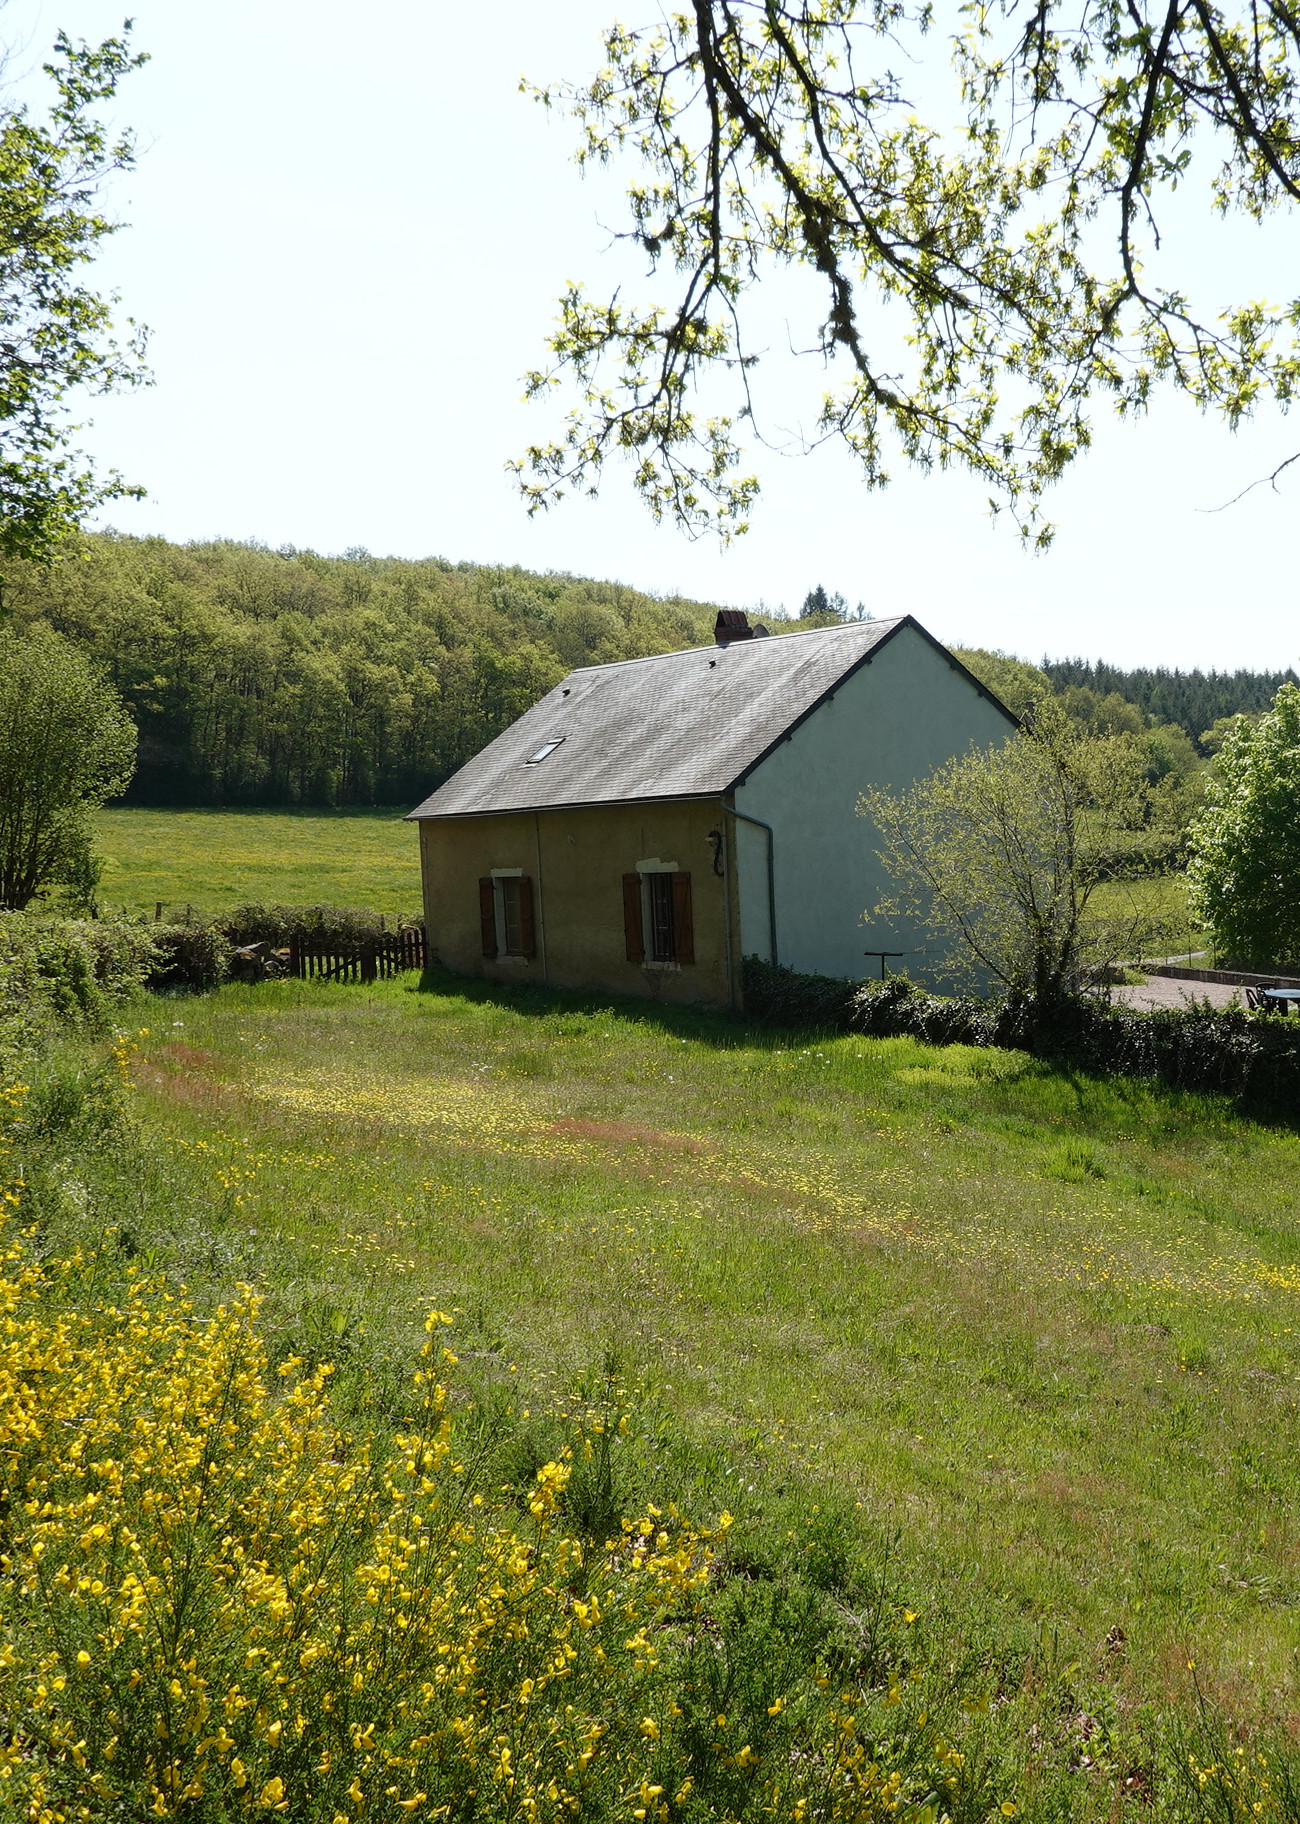 North facade of the Meulots gîte in its environment